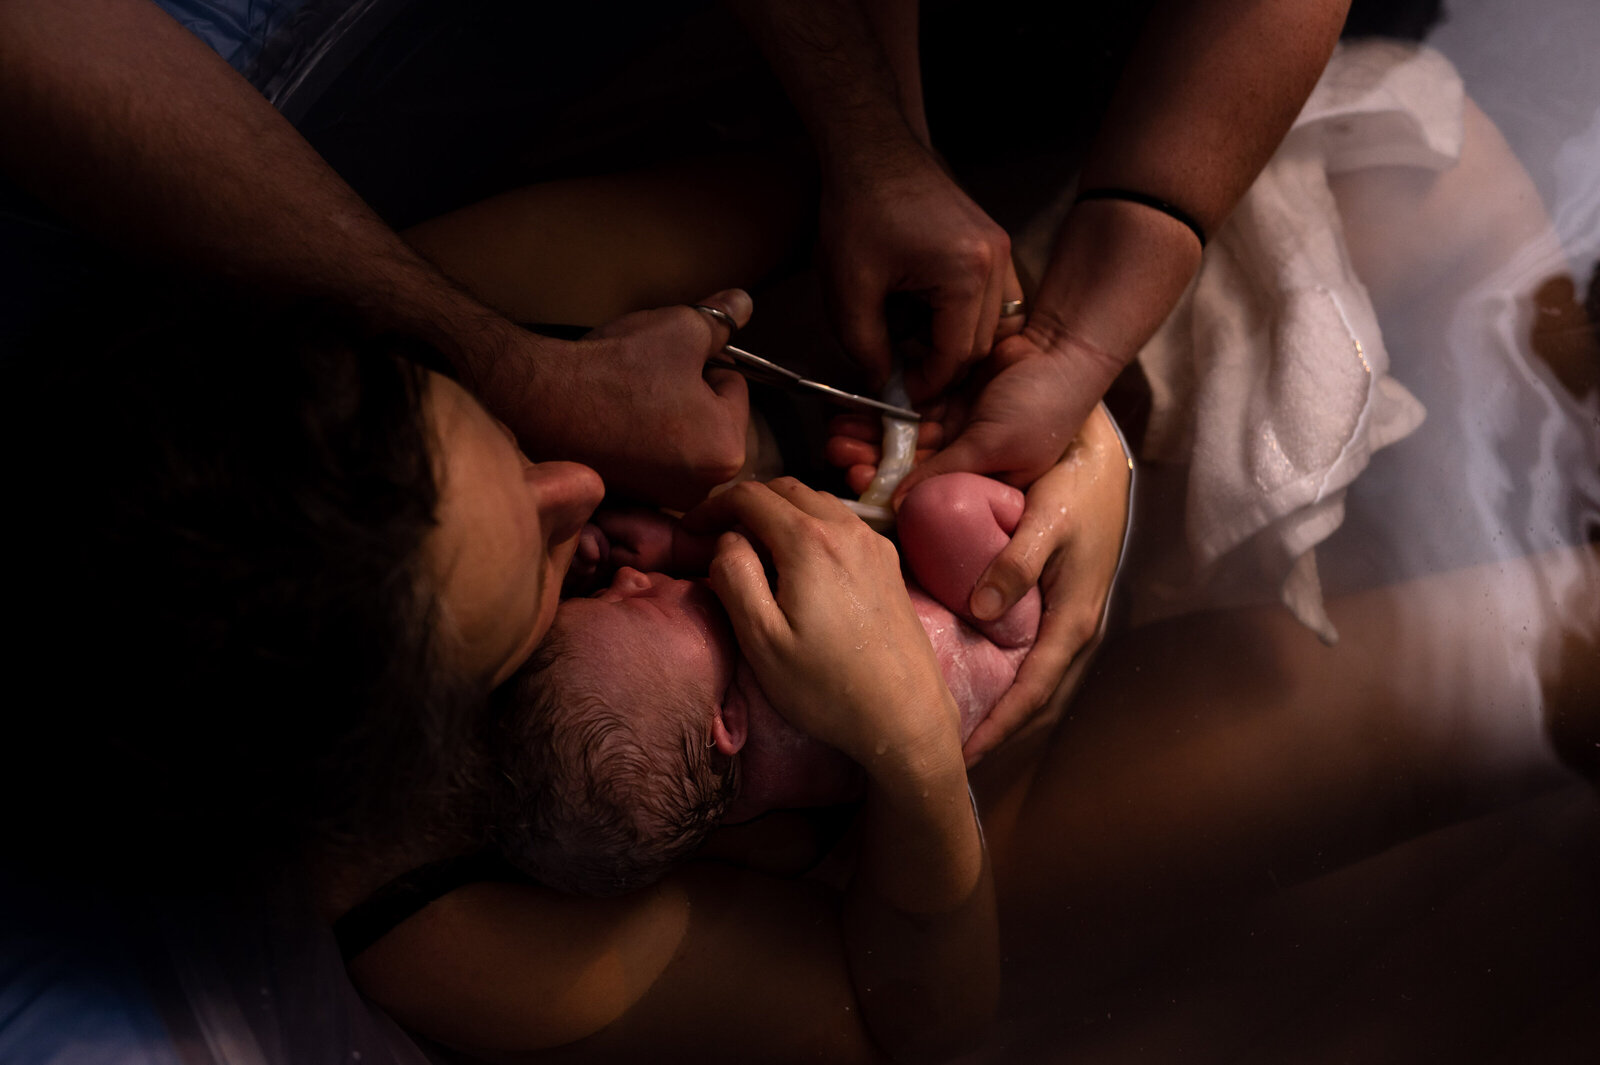 parents cut umbilical cord after waterbirth